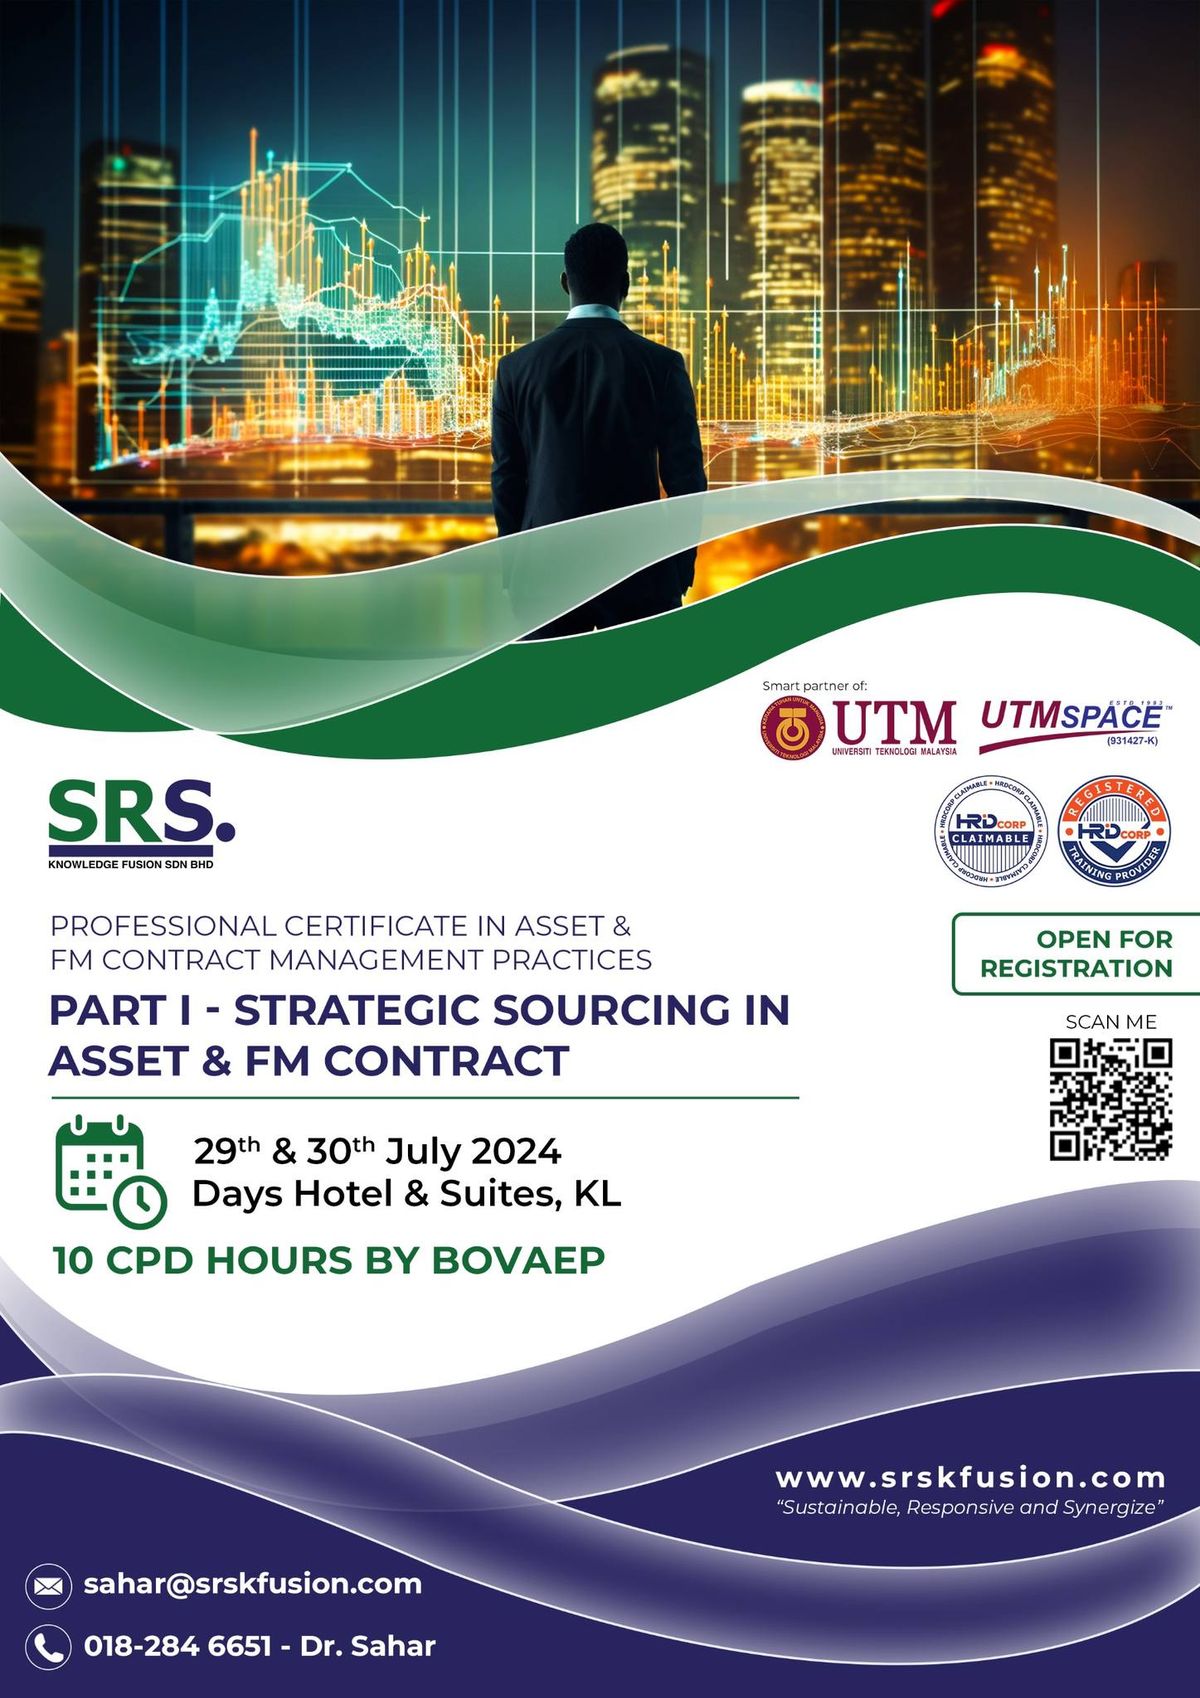 Professional Certificate in Asset & FM Contract Management Practices, Part I - Strategic Sourcing in Asset & FM Contract